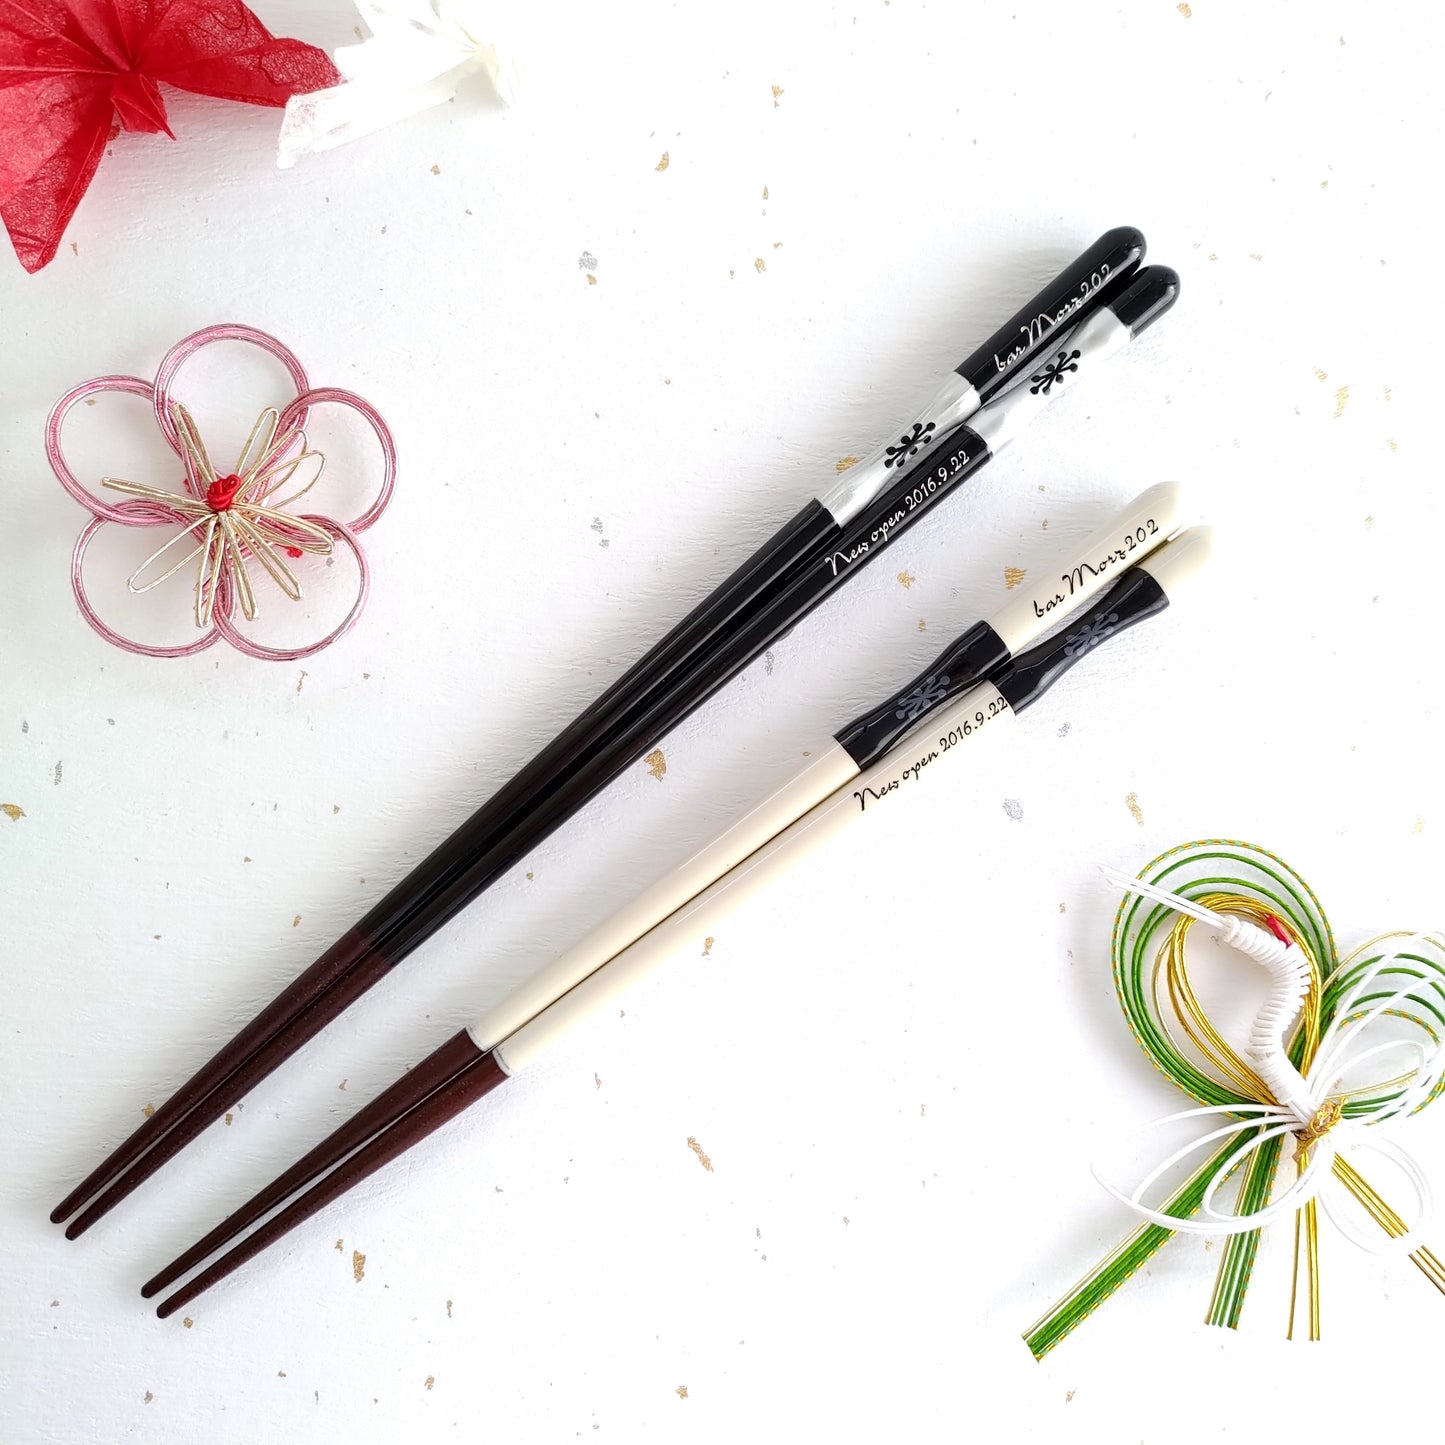 Heart of the forest Japanese chopsticks black white - DOUBLE PAIR